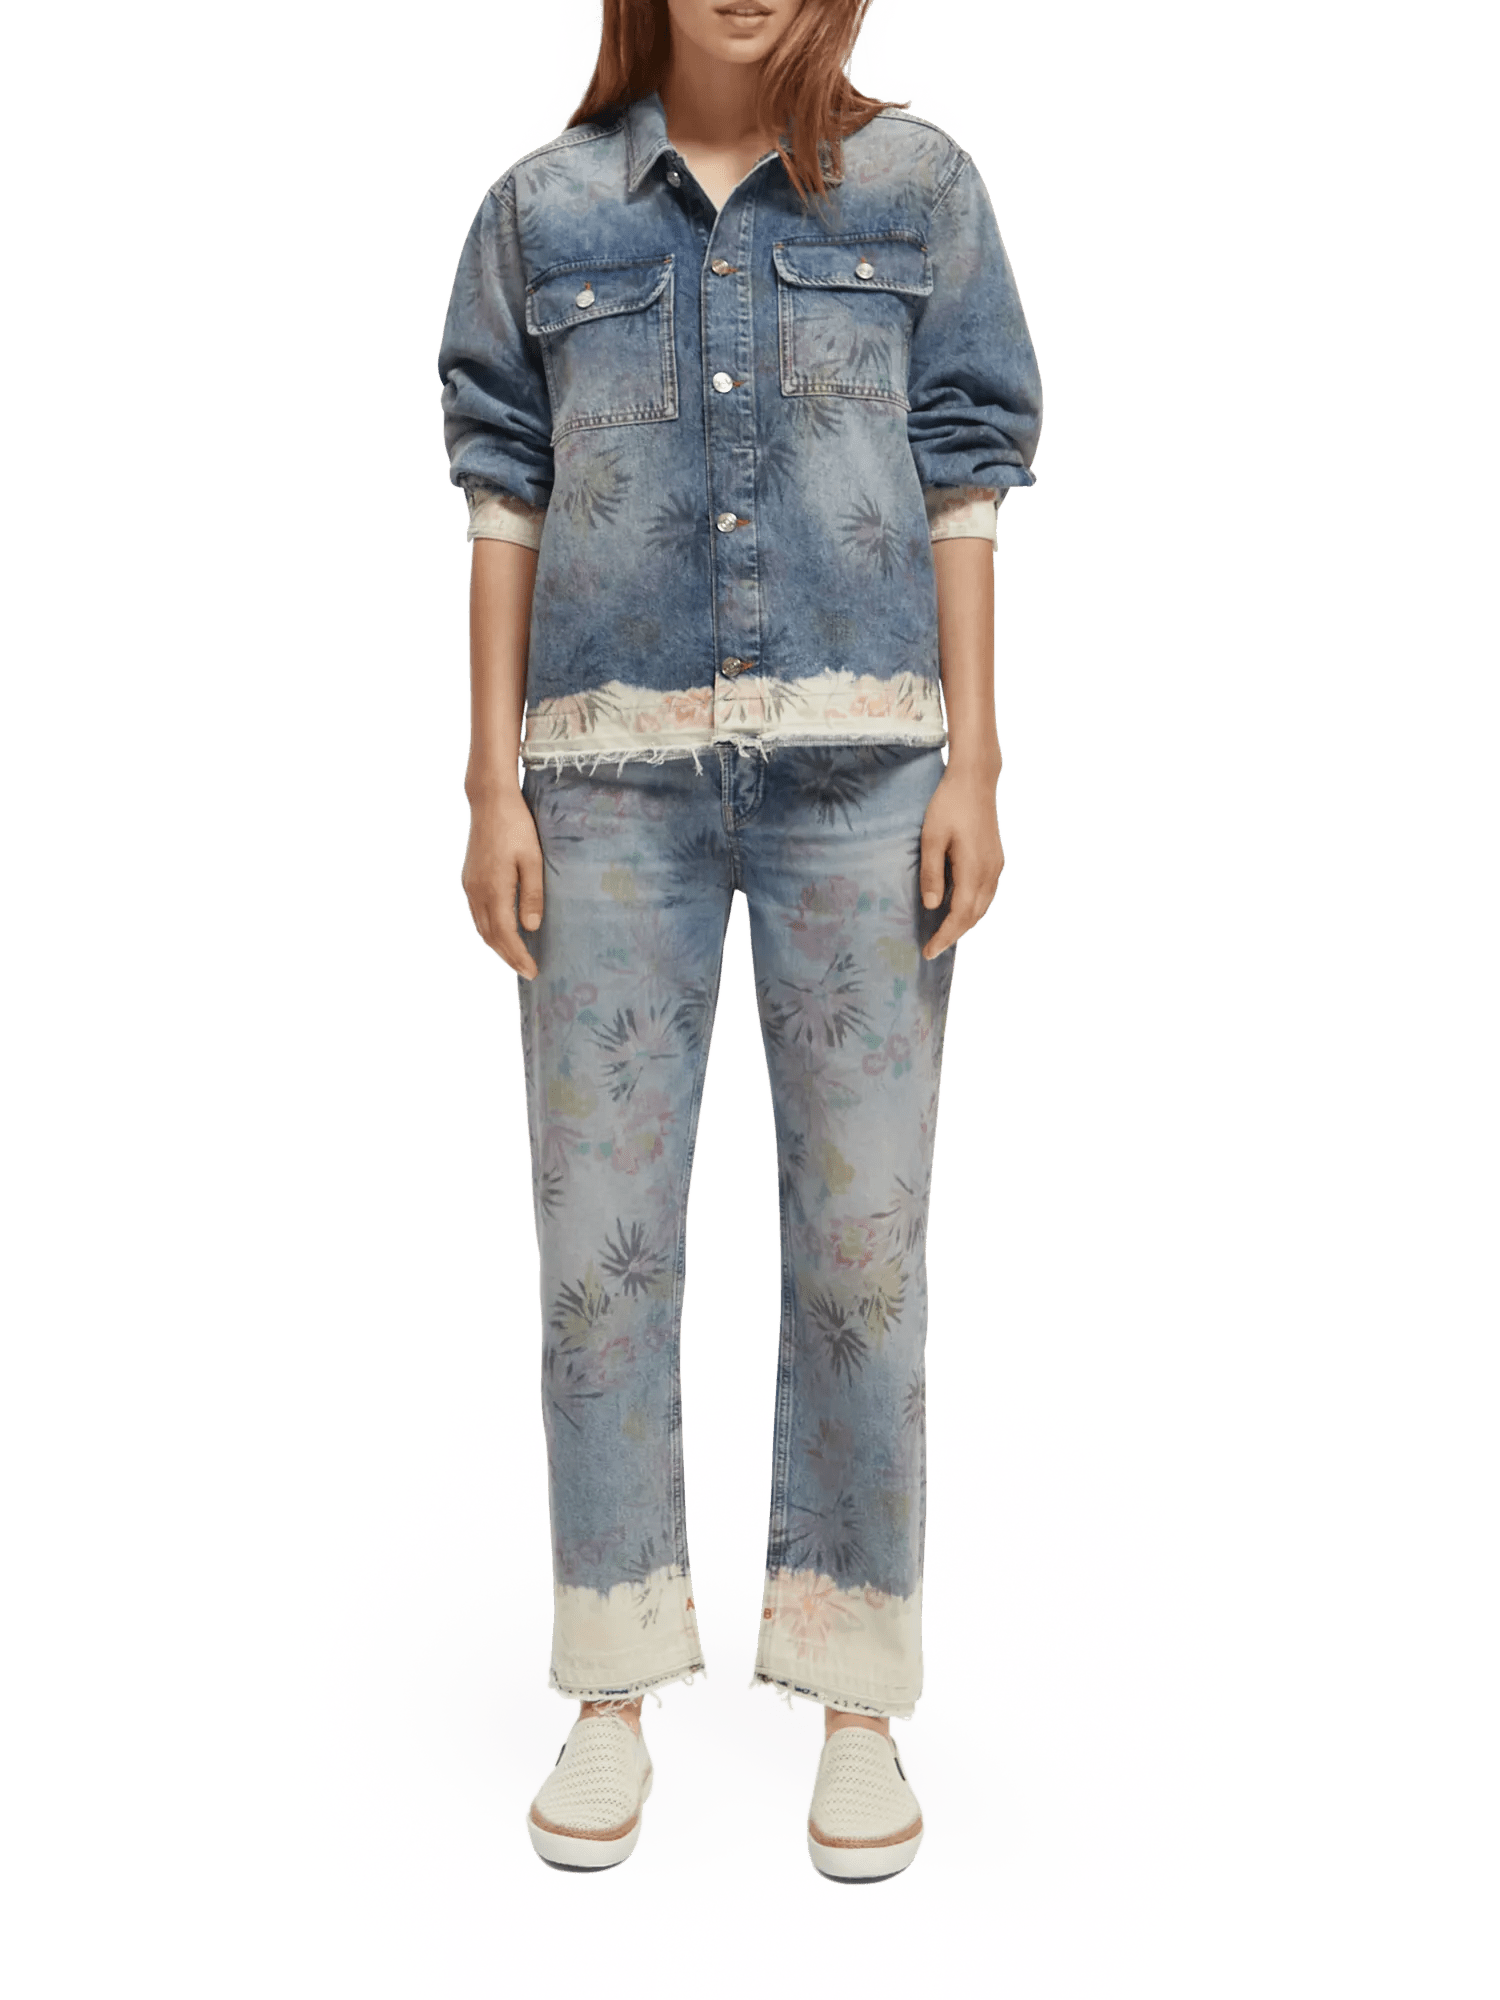 Scotch & Soda Trucker jacket with tie dye artworks - Peace and Love NHD-FNT